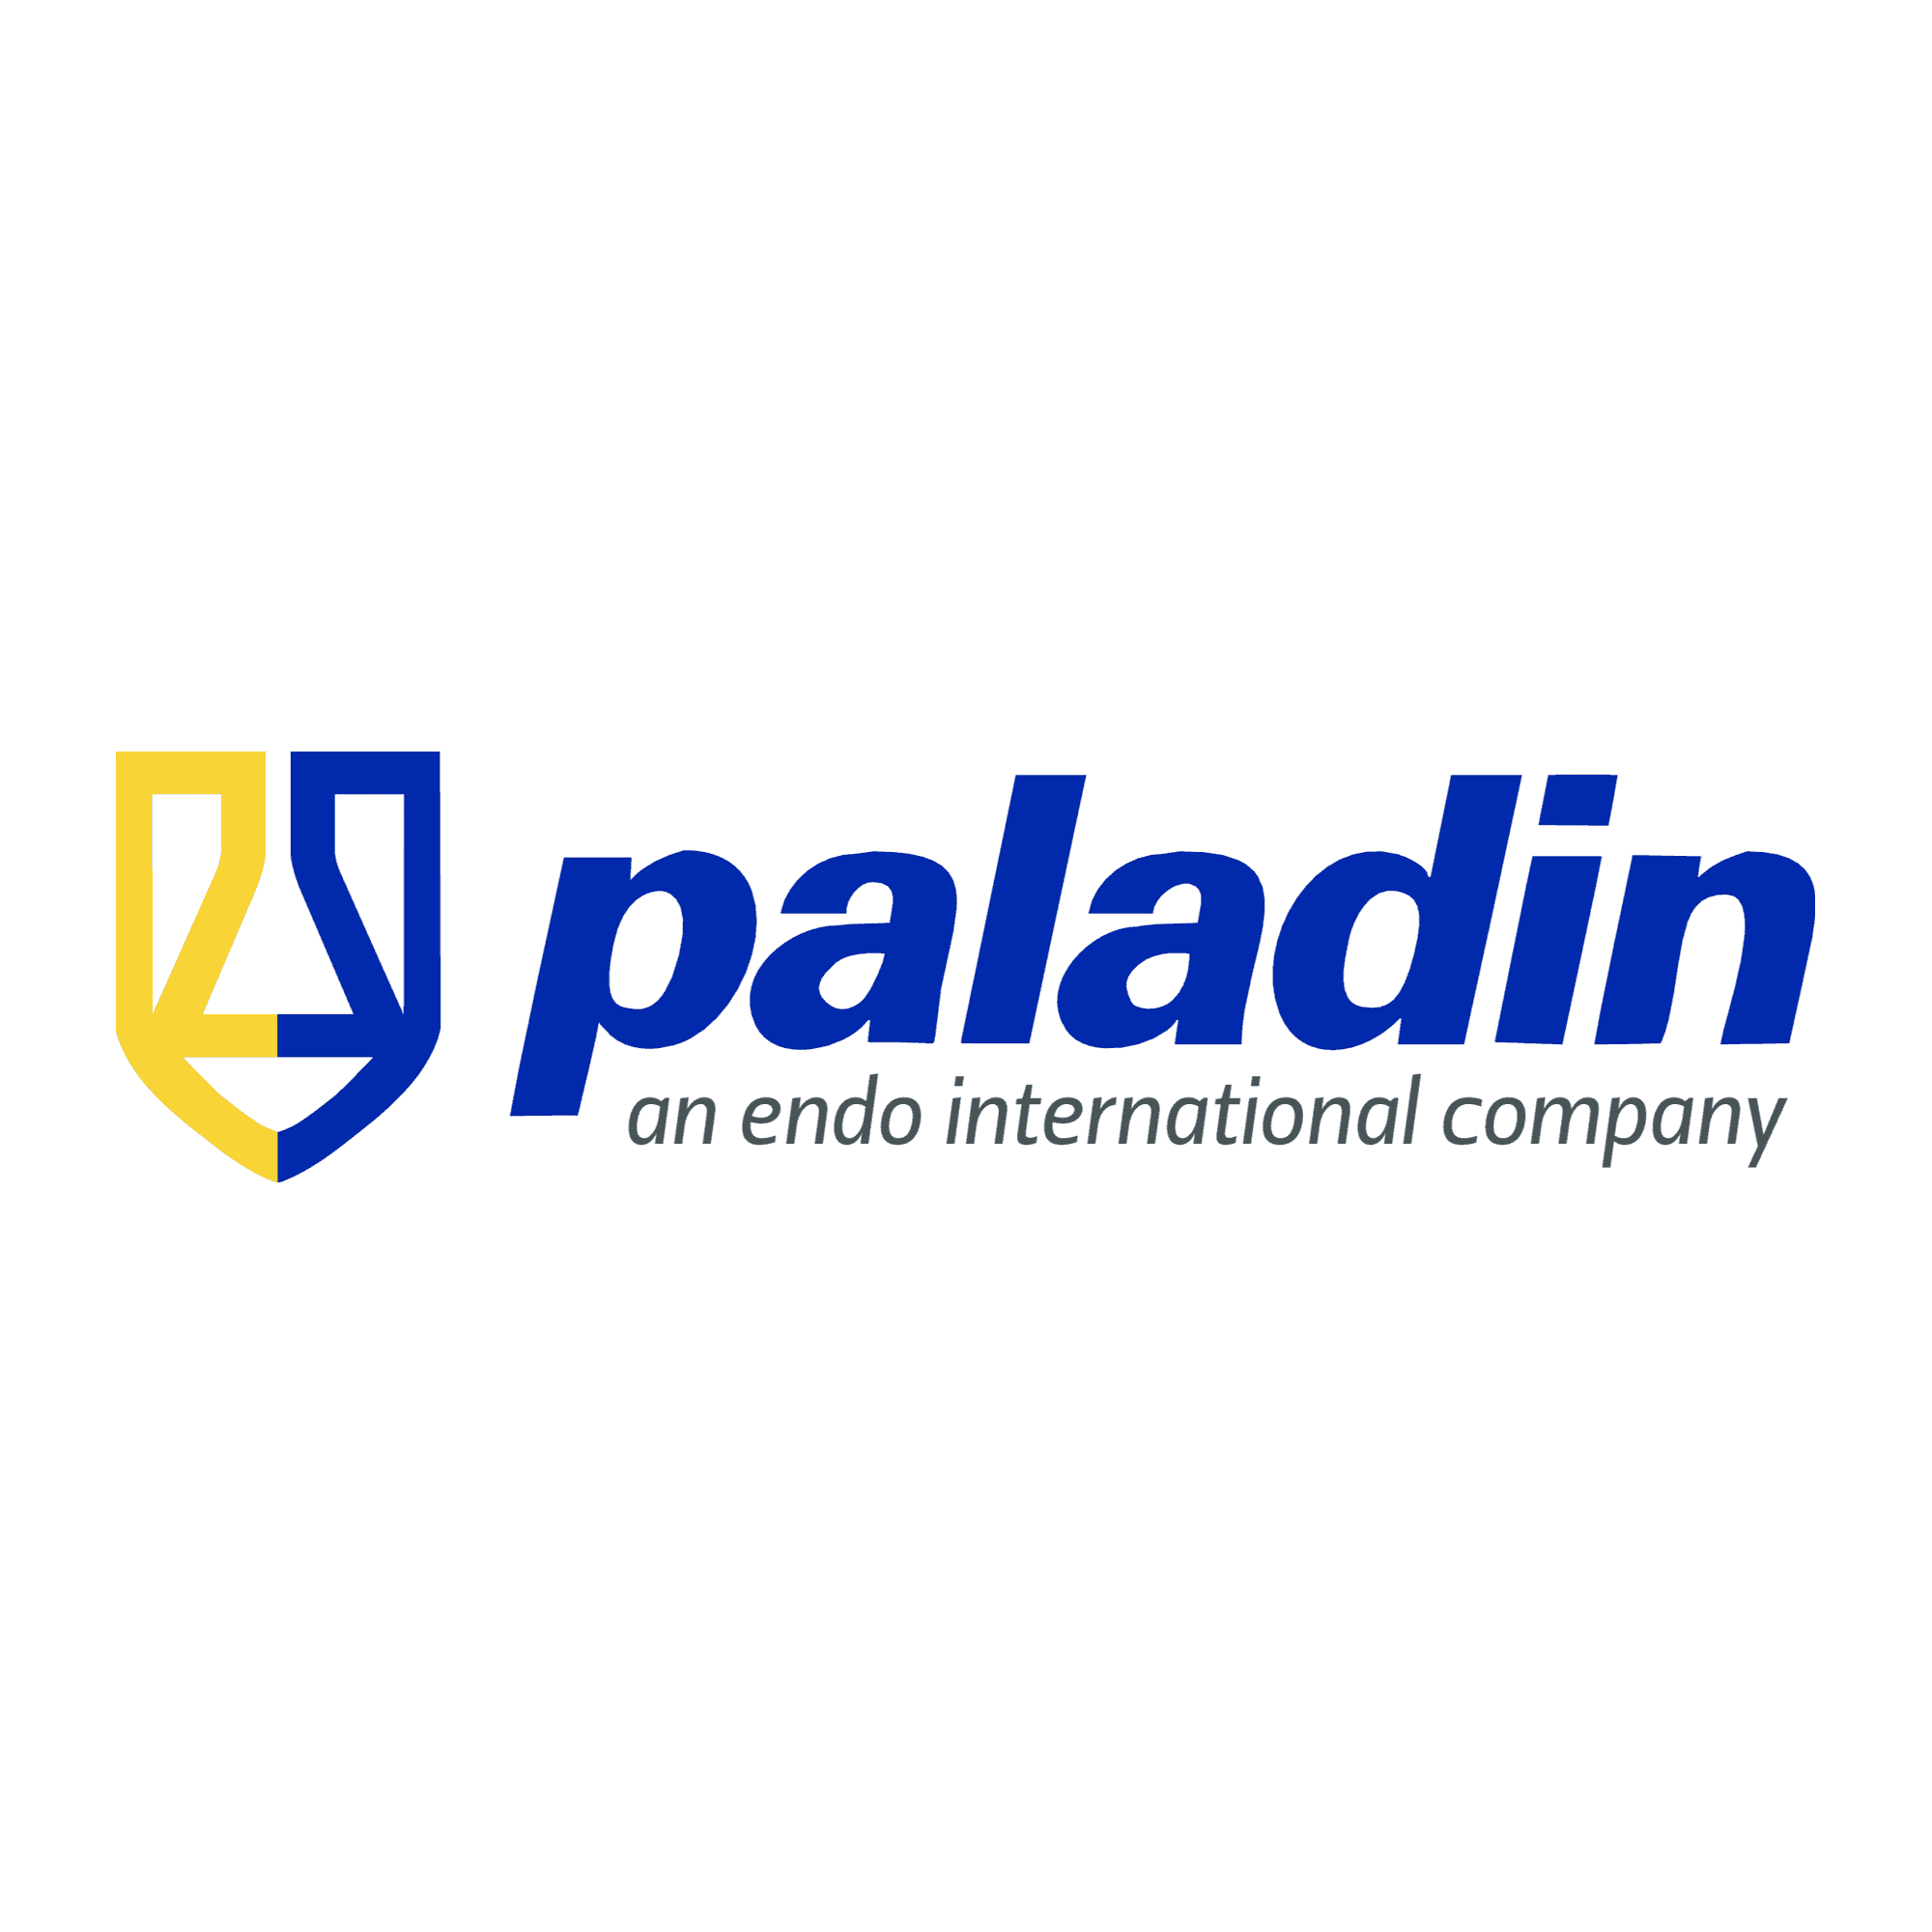 <p><strong style="color: rgb(255, 255, 0);">Paladin Labs Inc.</strong></p> logo